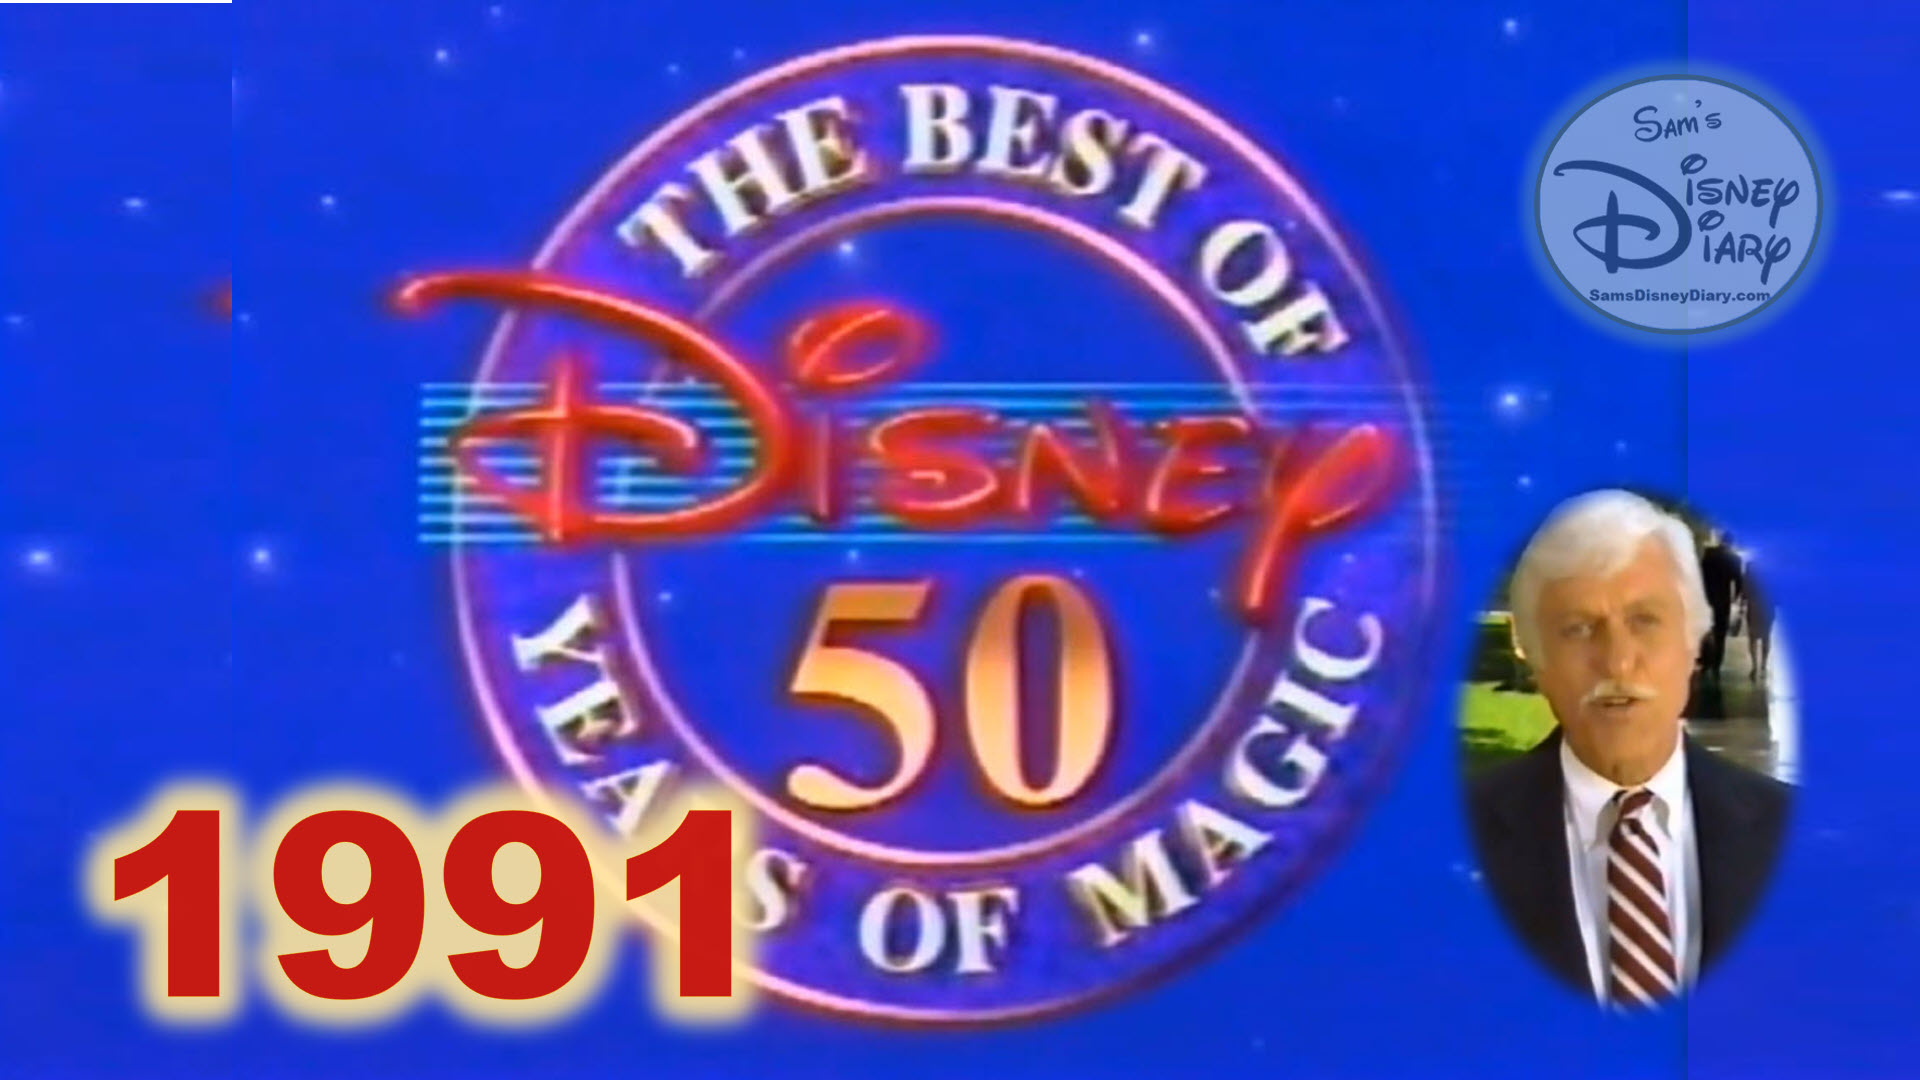 The Best of Disney: 50 Years of Magic (1991)